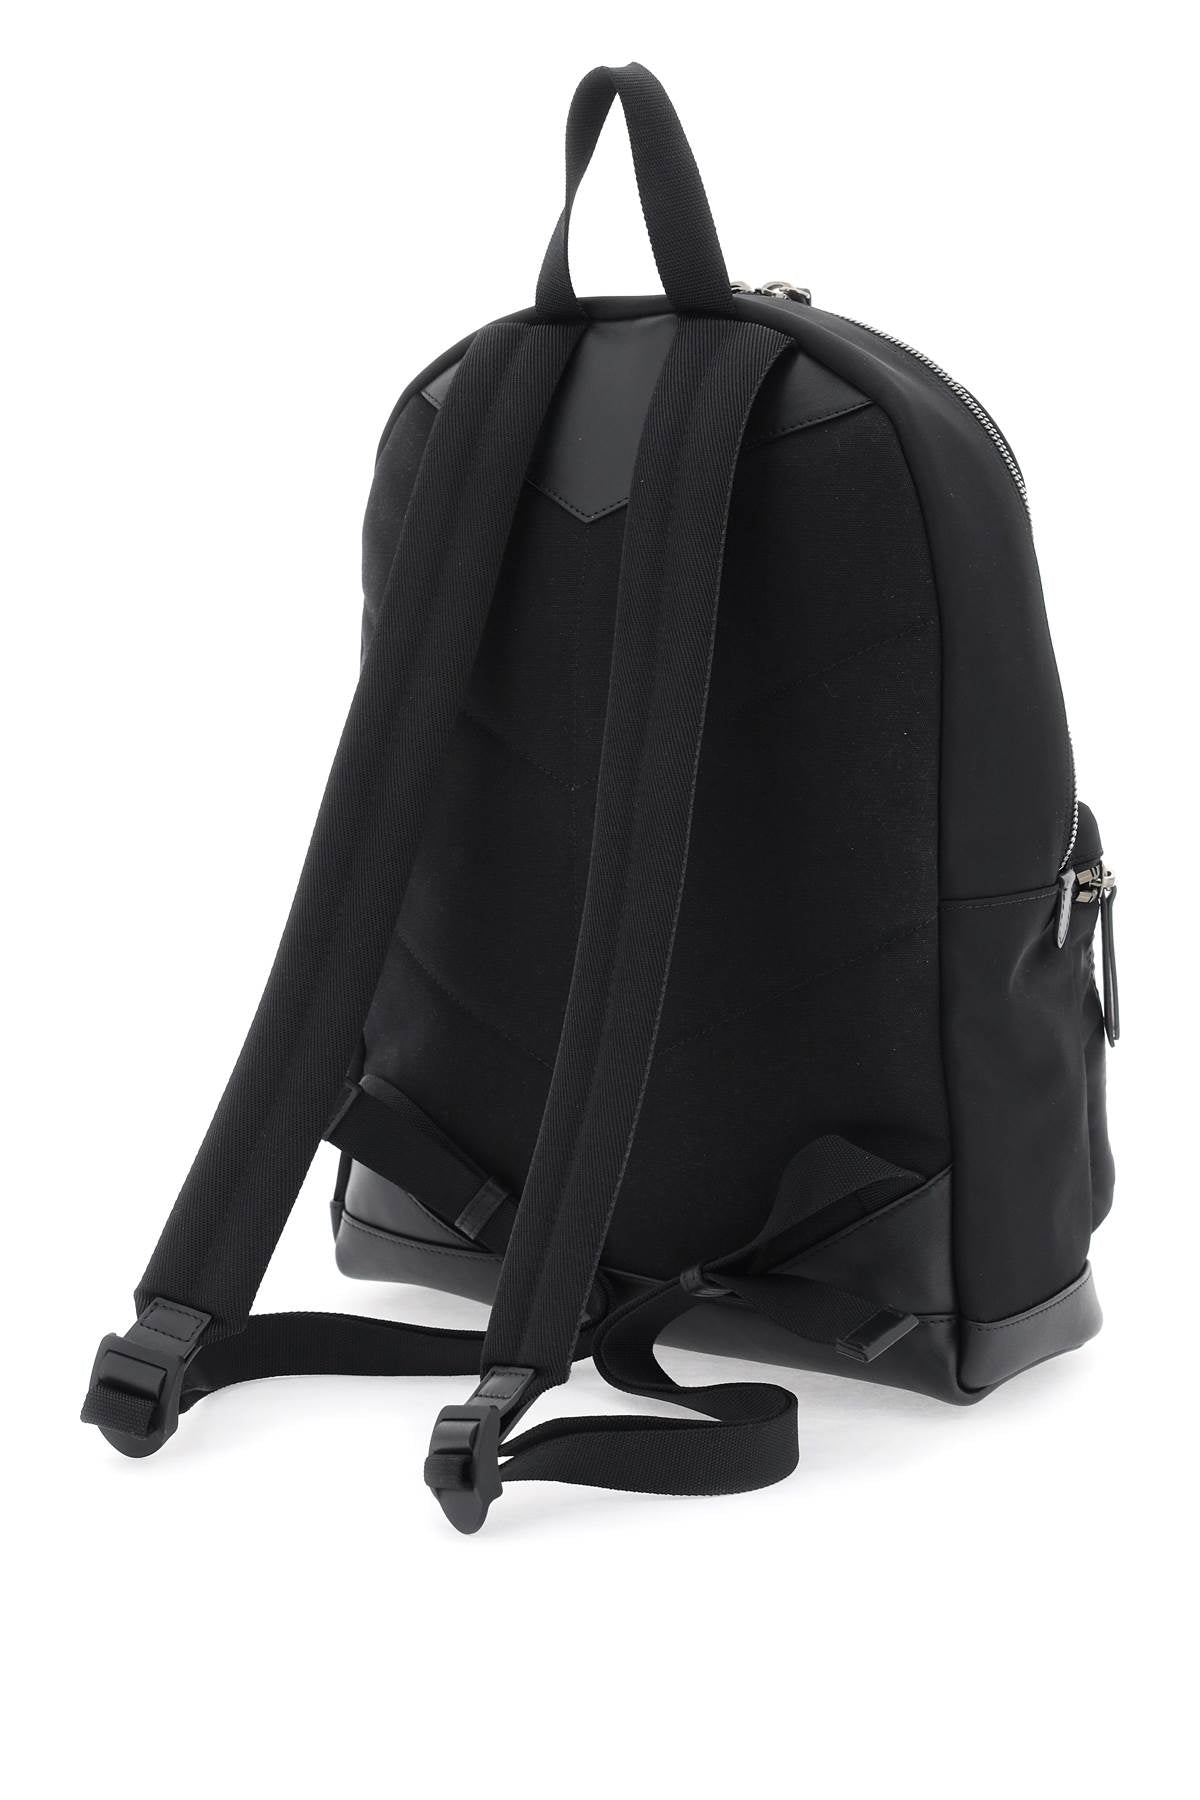 Nylon Wilmer Backpack for the Fashion-Forward Man